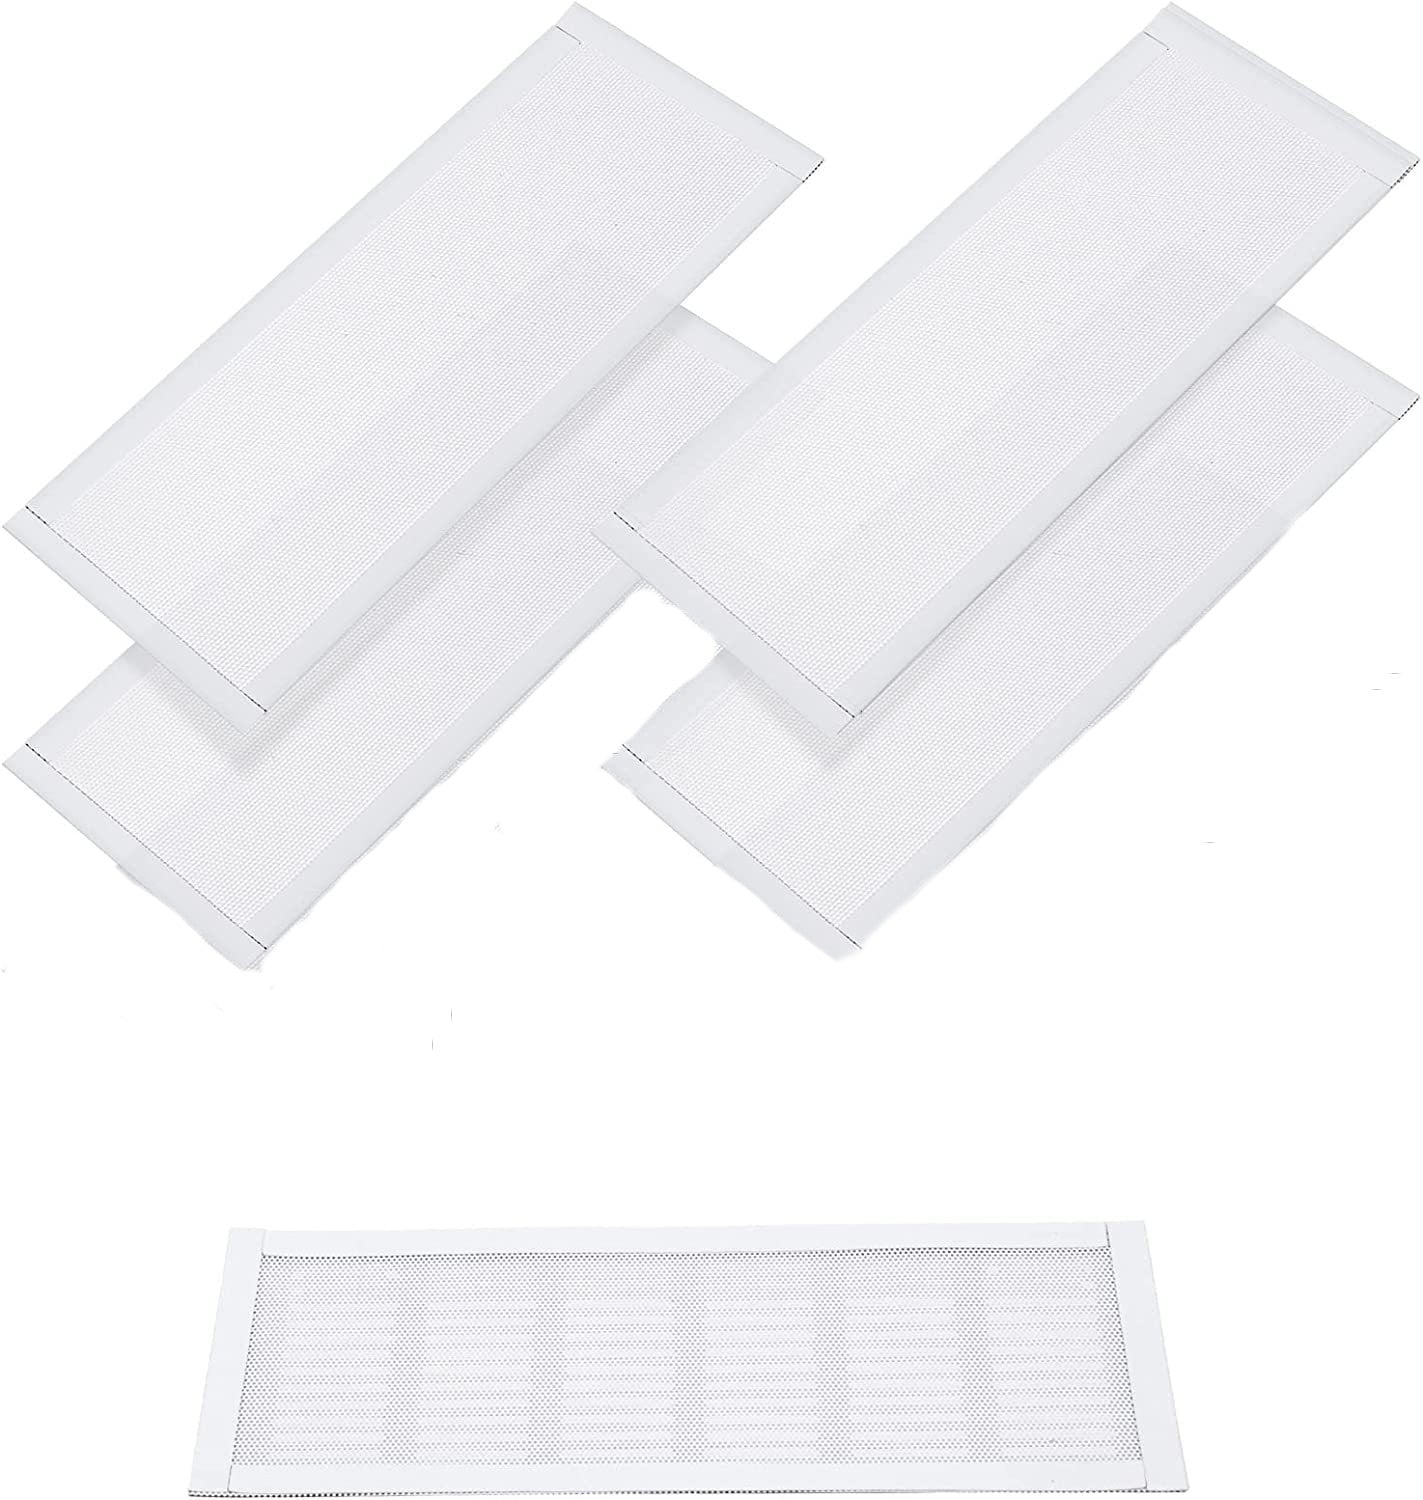 Strong Magnetic Vent Cover Register Cover for Air Vents & Looks Like a Vent  Grille! an AC Vent Deflector in A Magnetic Sheet Form - Pure White